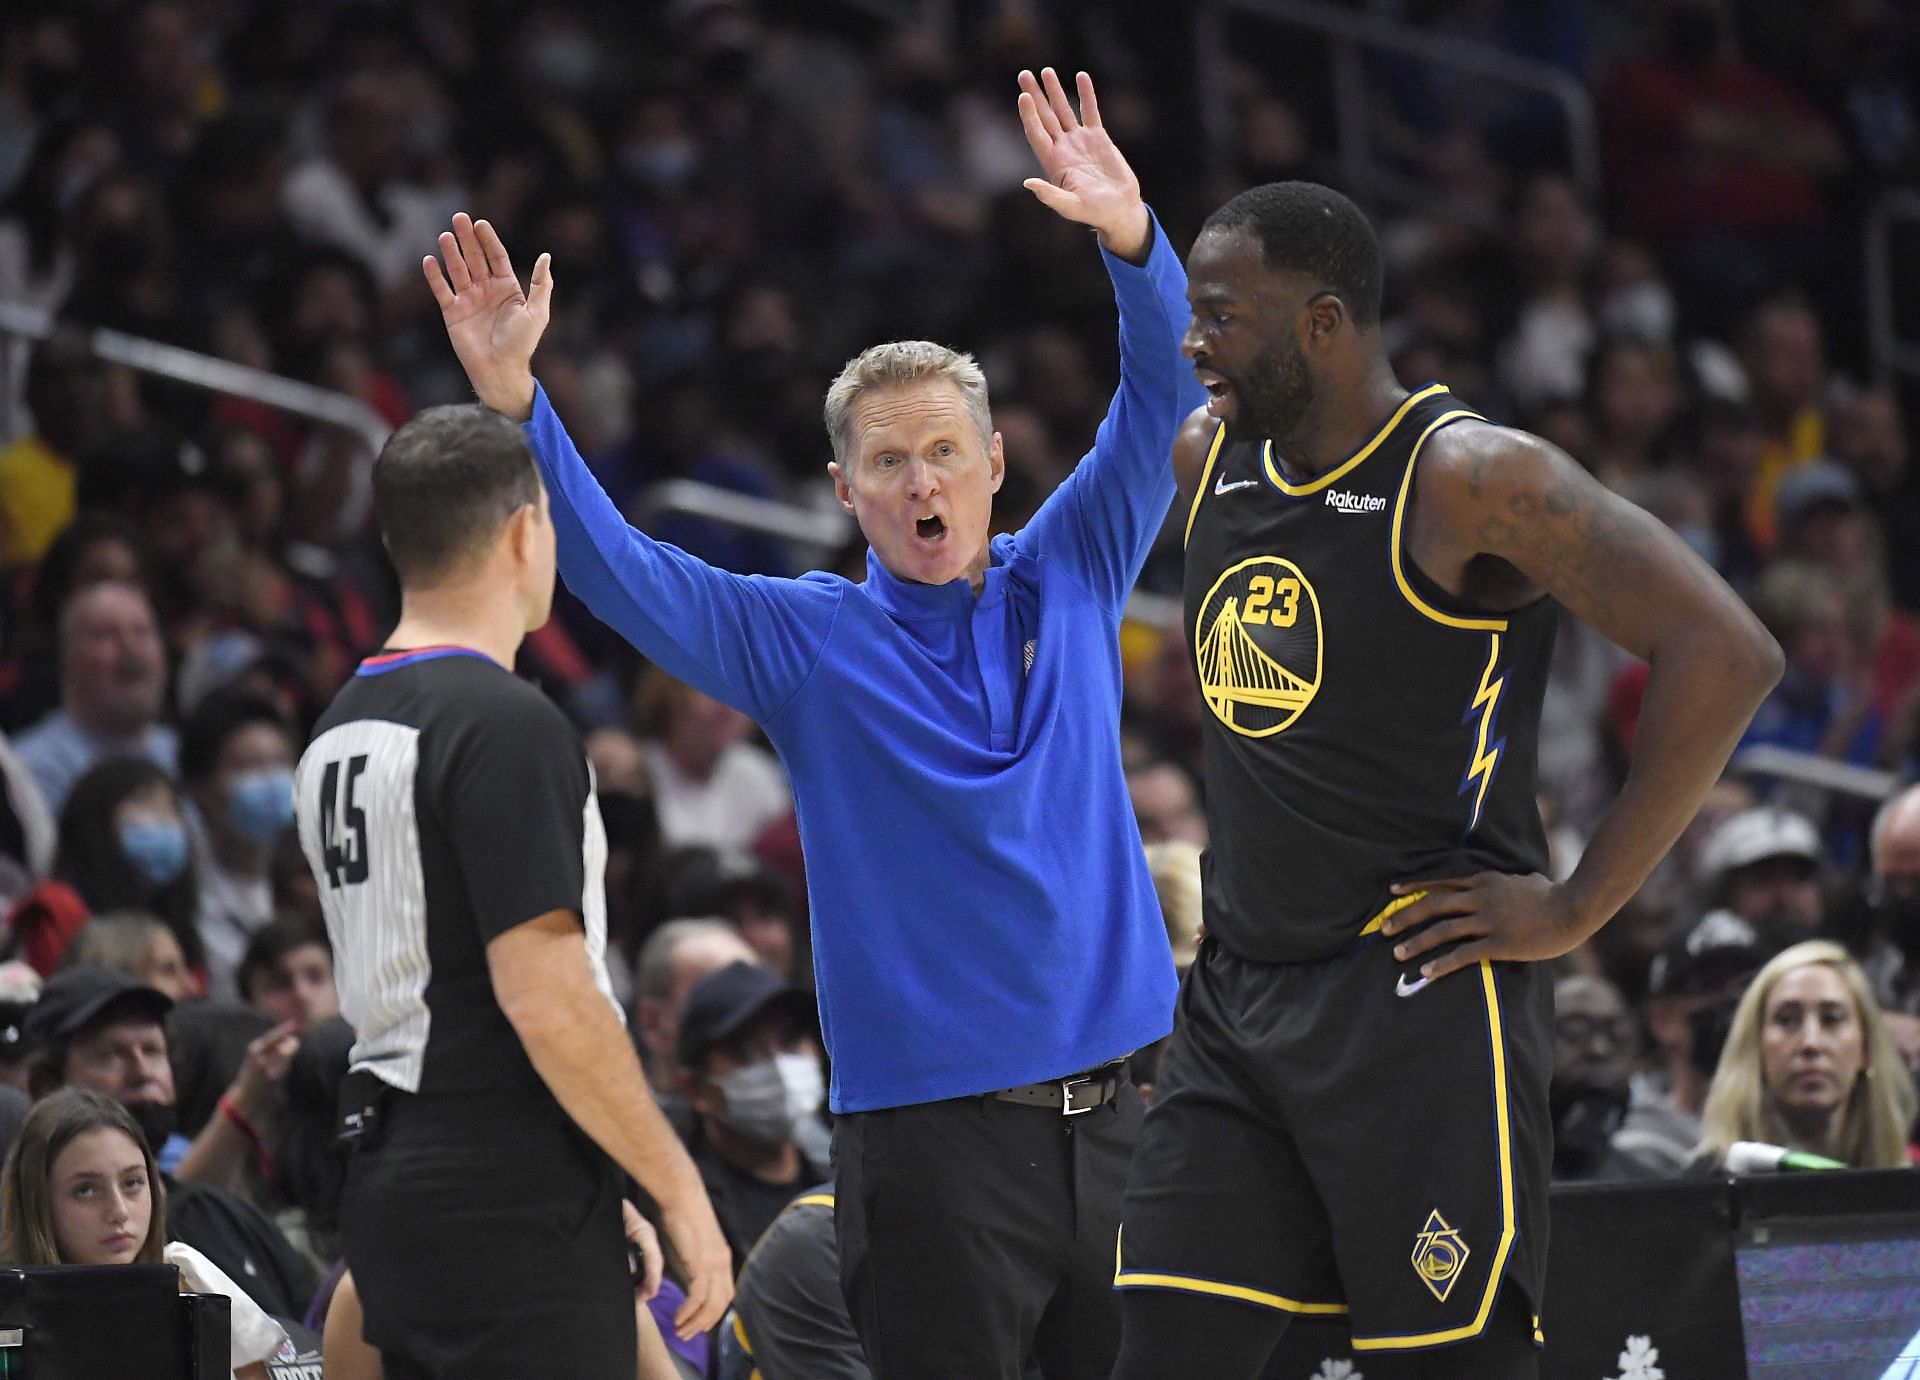 Head coach Steve Kerr of the Golden State Warriors reacts after Draymond Green #23 was called with a technical foul by referee Brian Forte #45 during the second half against the Los Angeles Clippers at Staples Center on November 28, 2021 in Los Angeles, California.